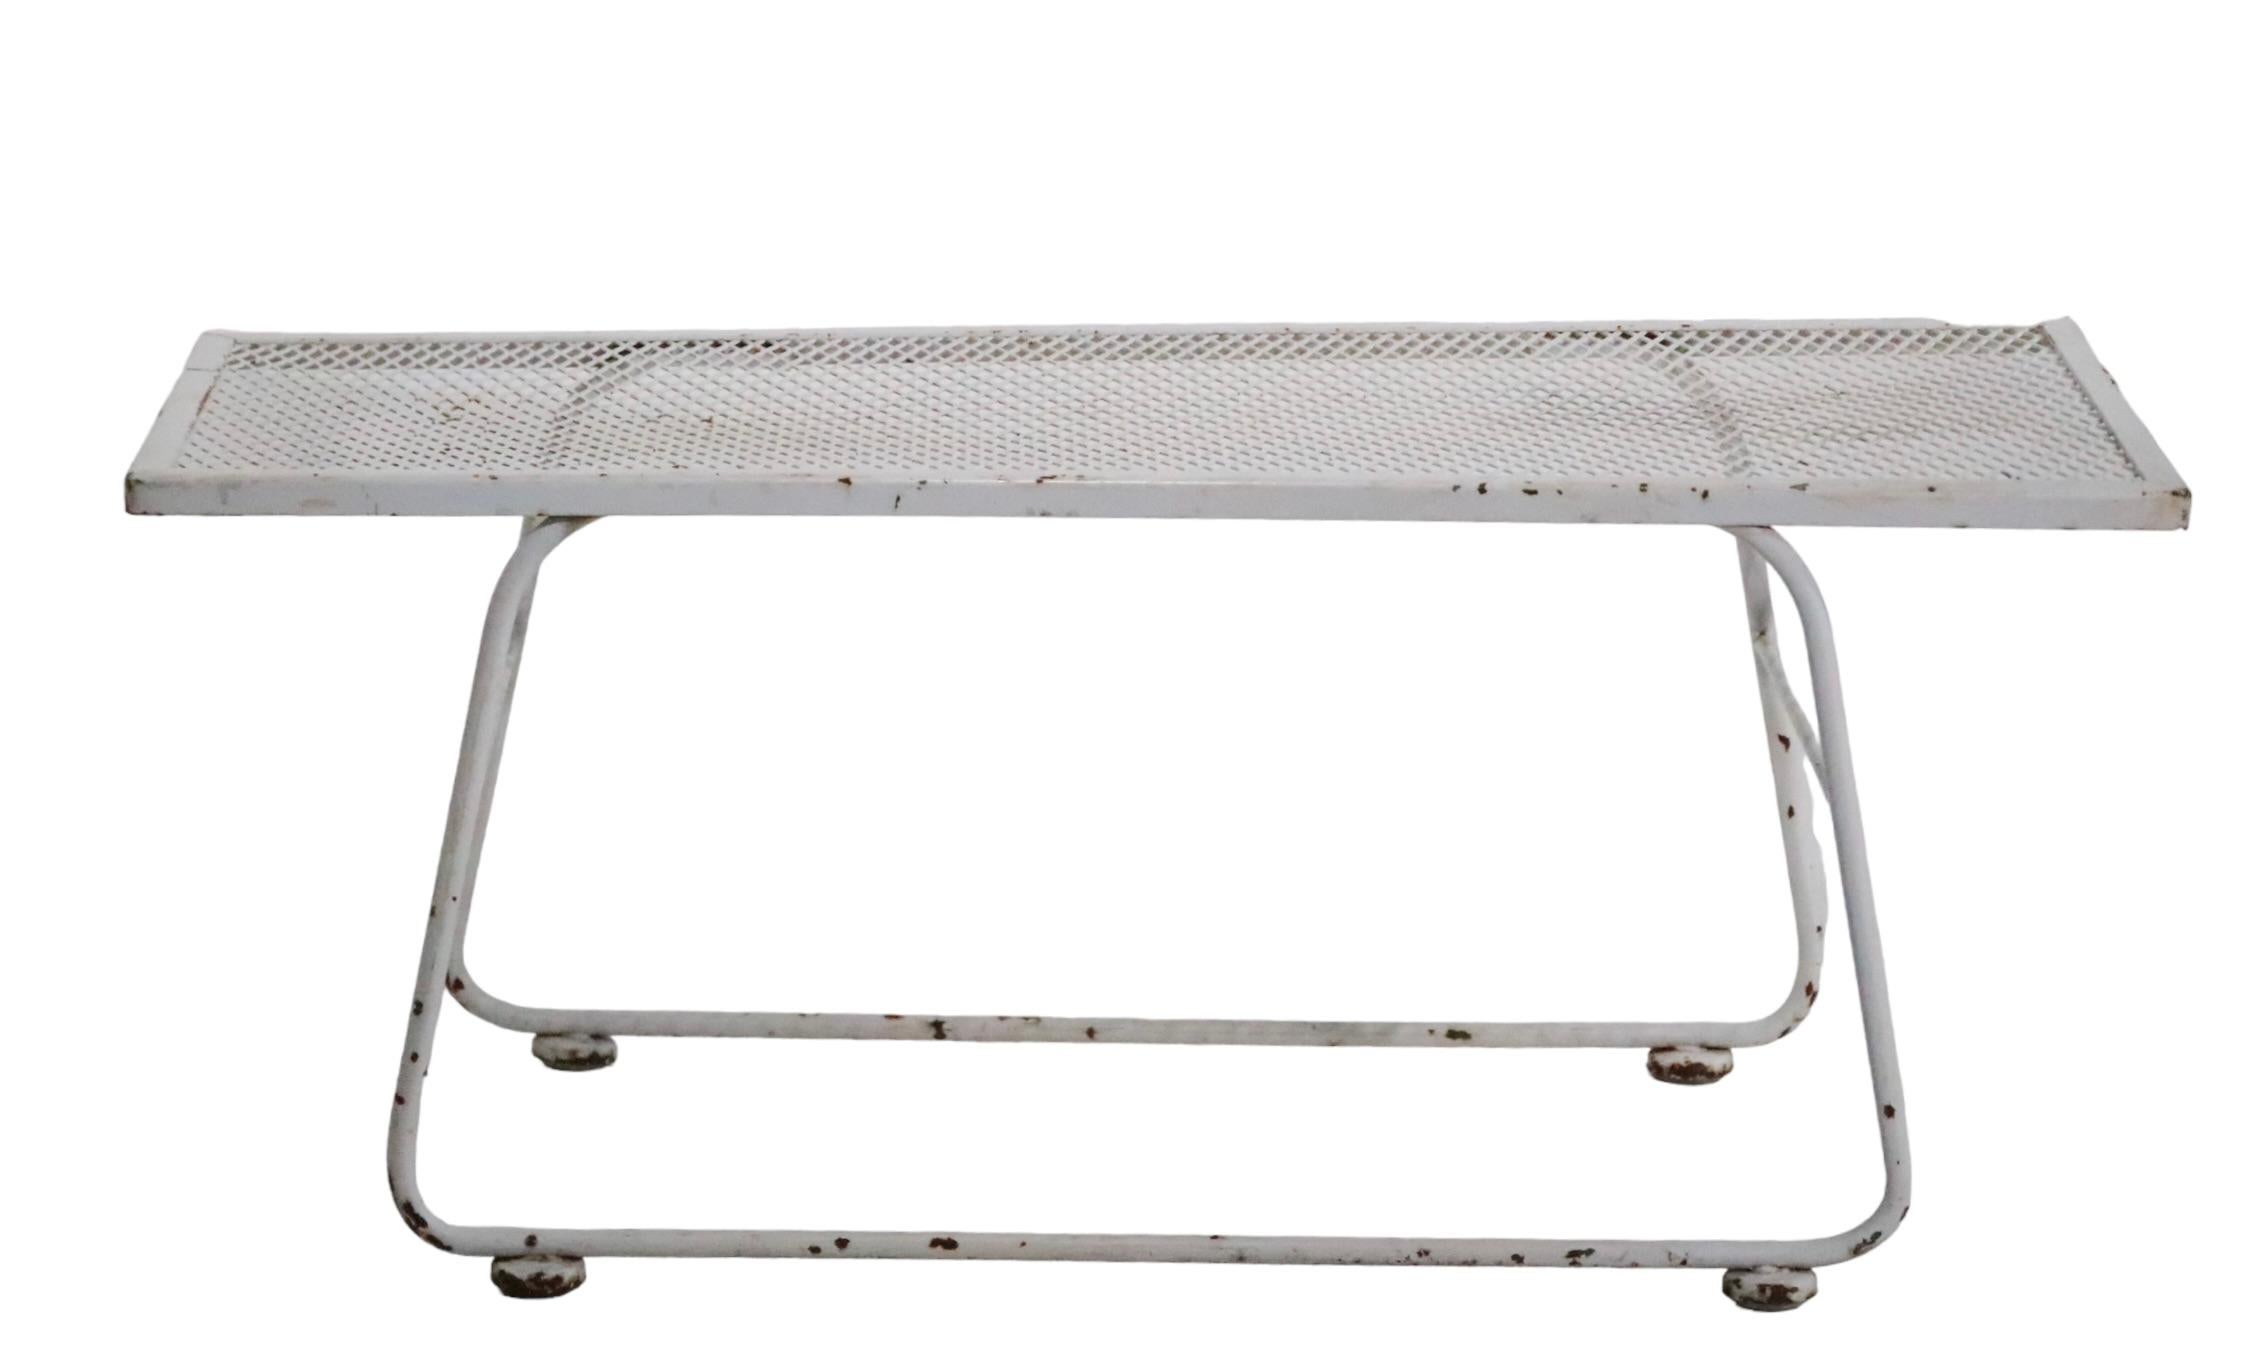 Mid Century wrought iron and metal mesh garden, patio, poolside table, attributed to Woodard. The table features rectangular metal mesh top, on a continuous wrought iron leg base. The table is in original white paint finish, which shows wear, normal